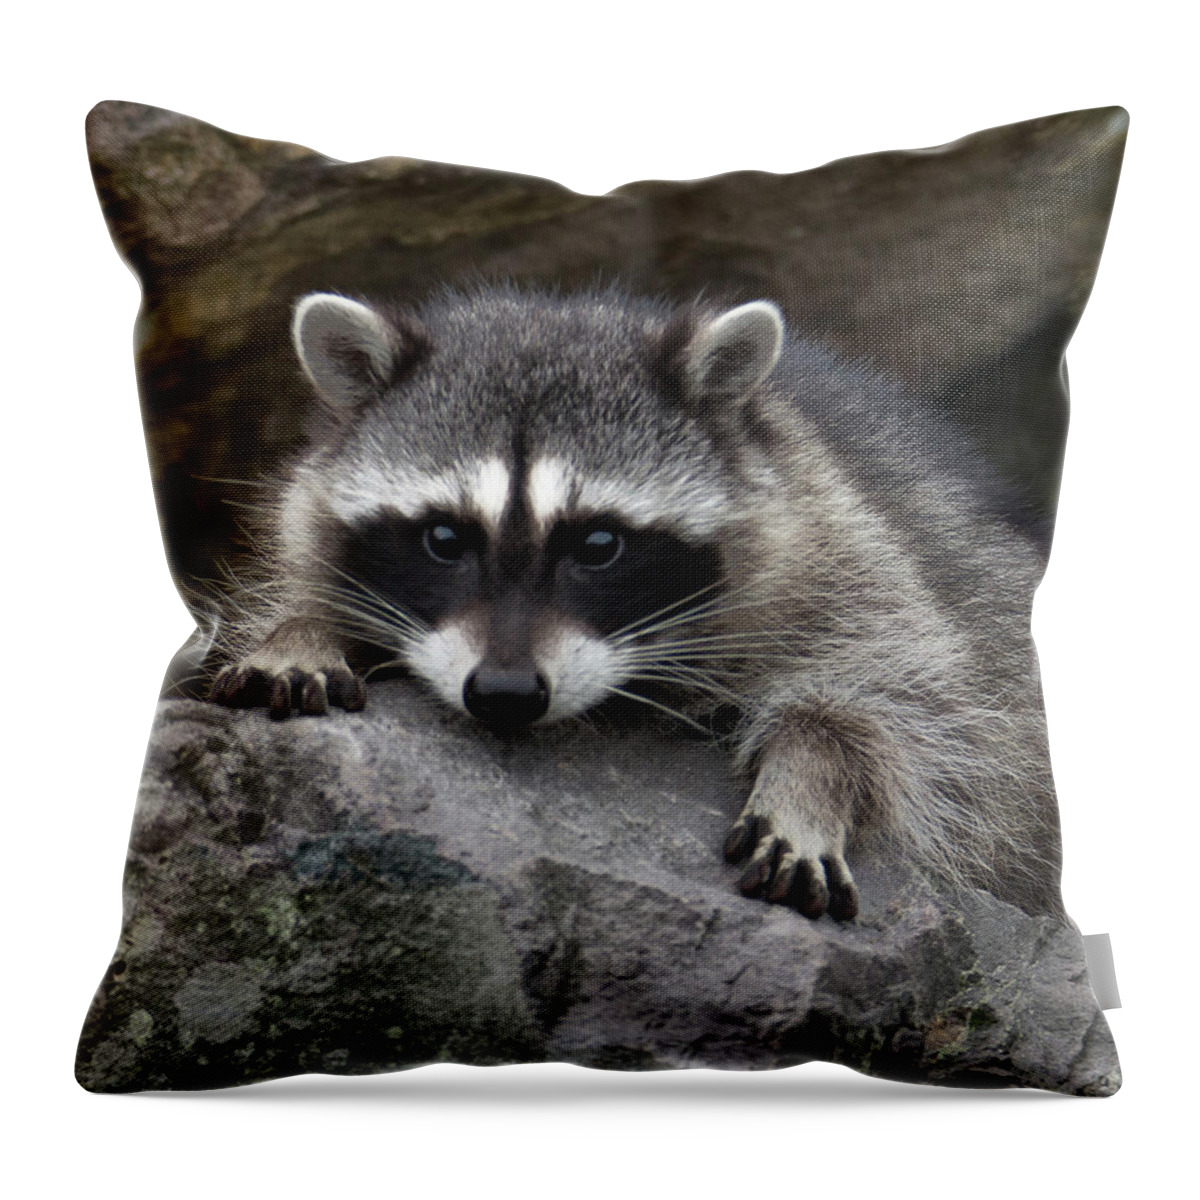 Raccoon Throw Pillow featuring the photograph The Stare by Jerry Cahill